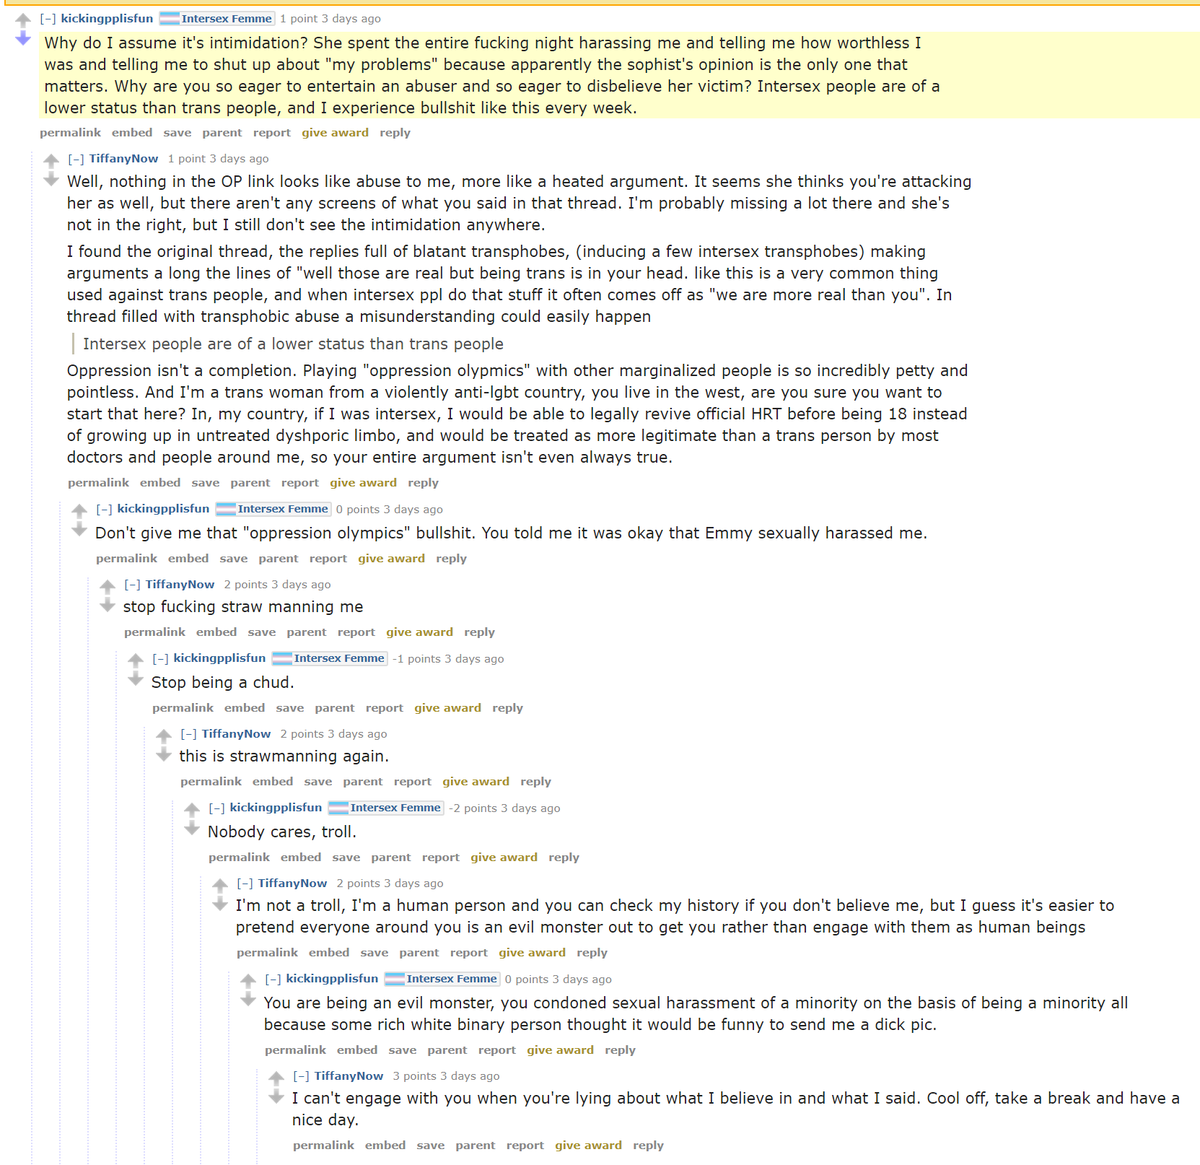 sexually harassed. So I looked that up, and well... that came out of nowhere during this discussion, and MintPossum called /u/TiffanyNow an evil monster because she had supposedly said sexual harassment was okay.